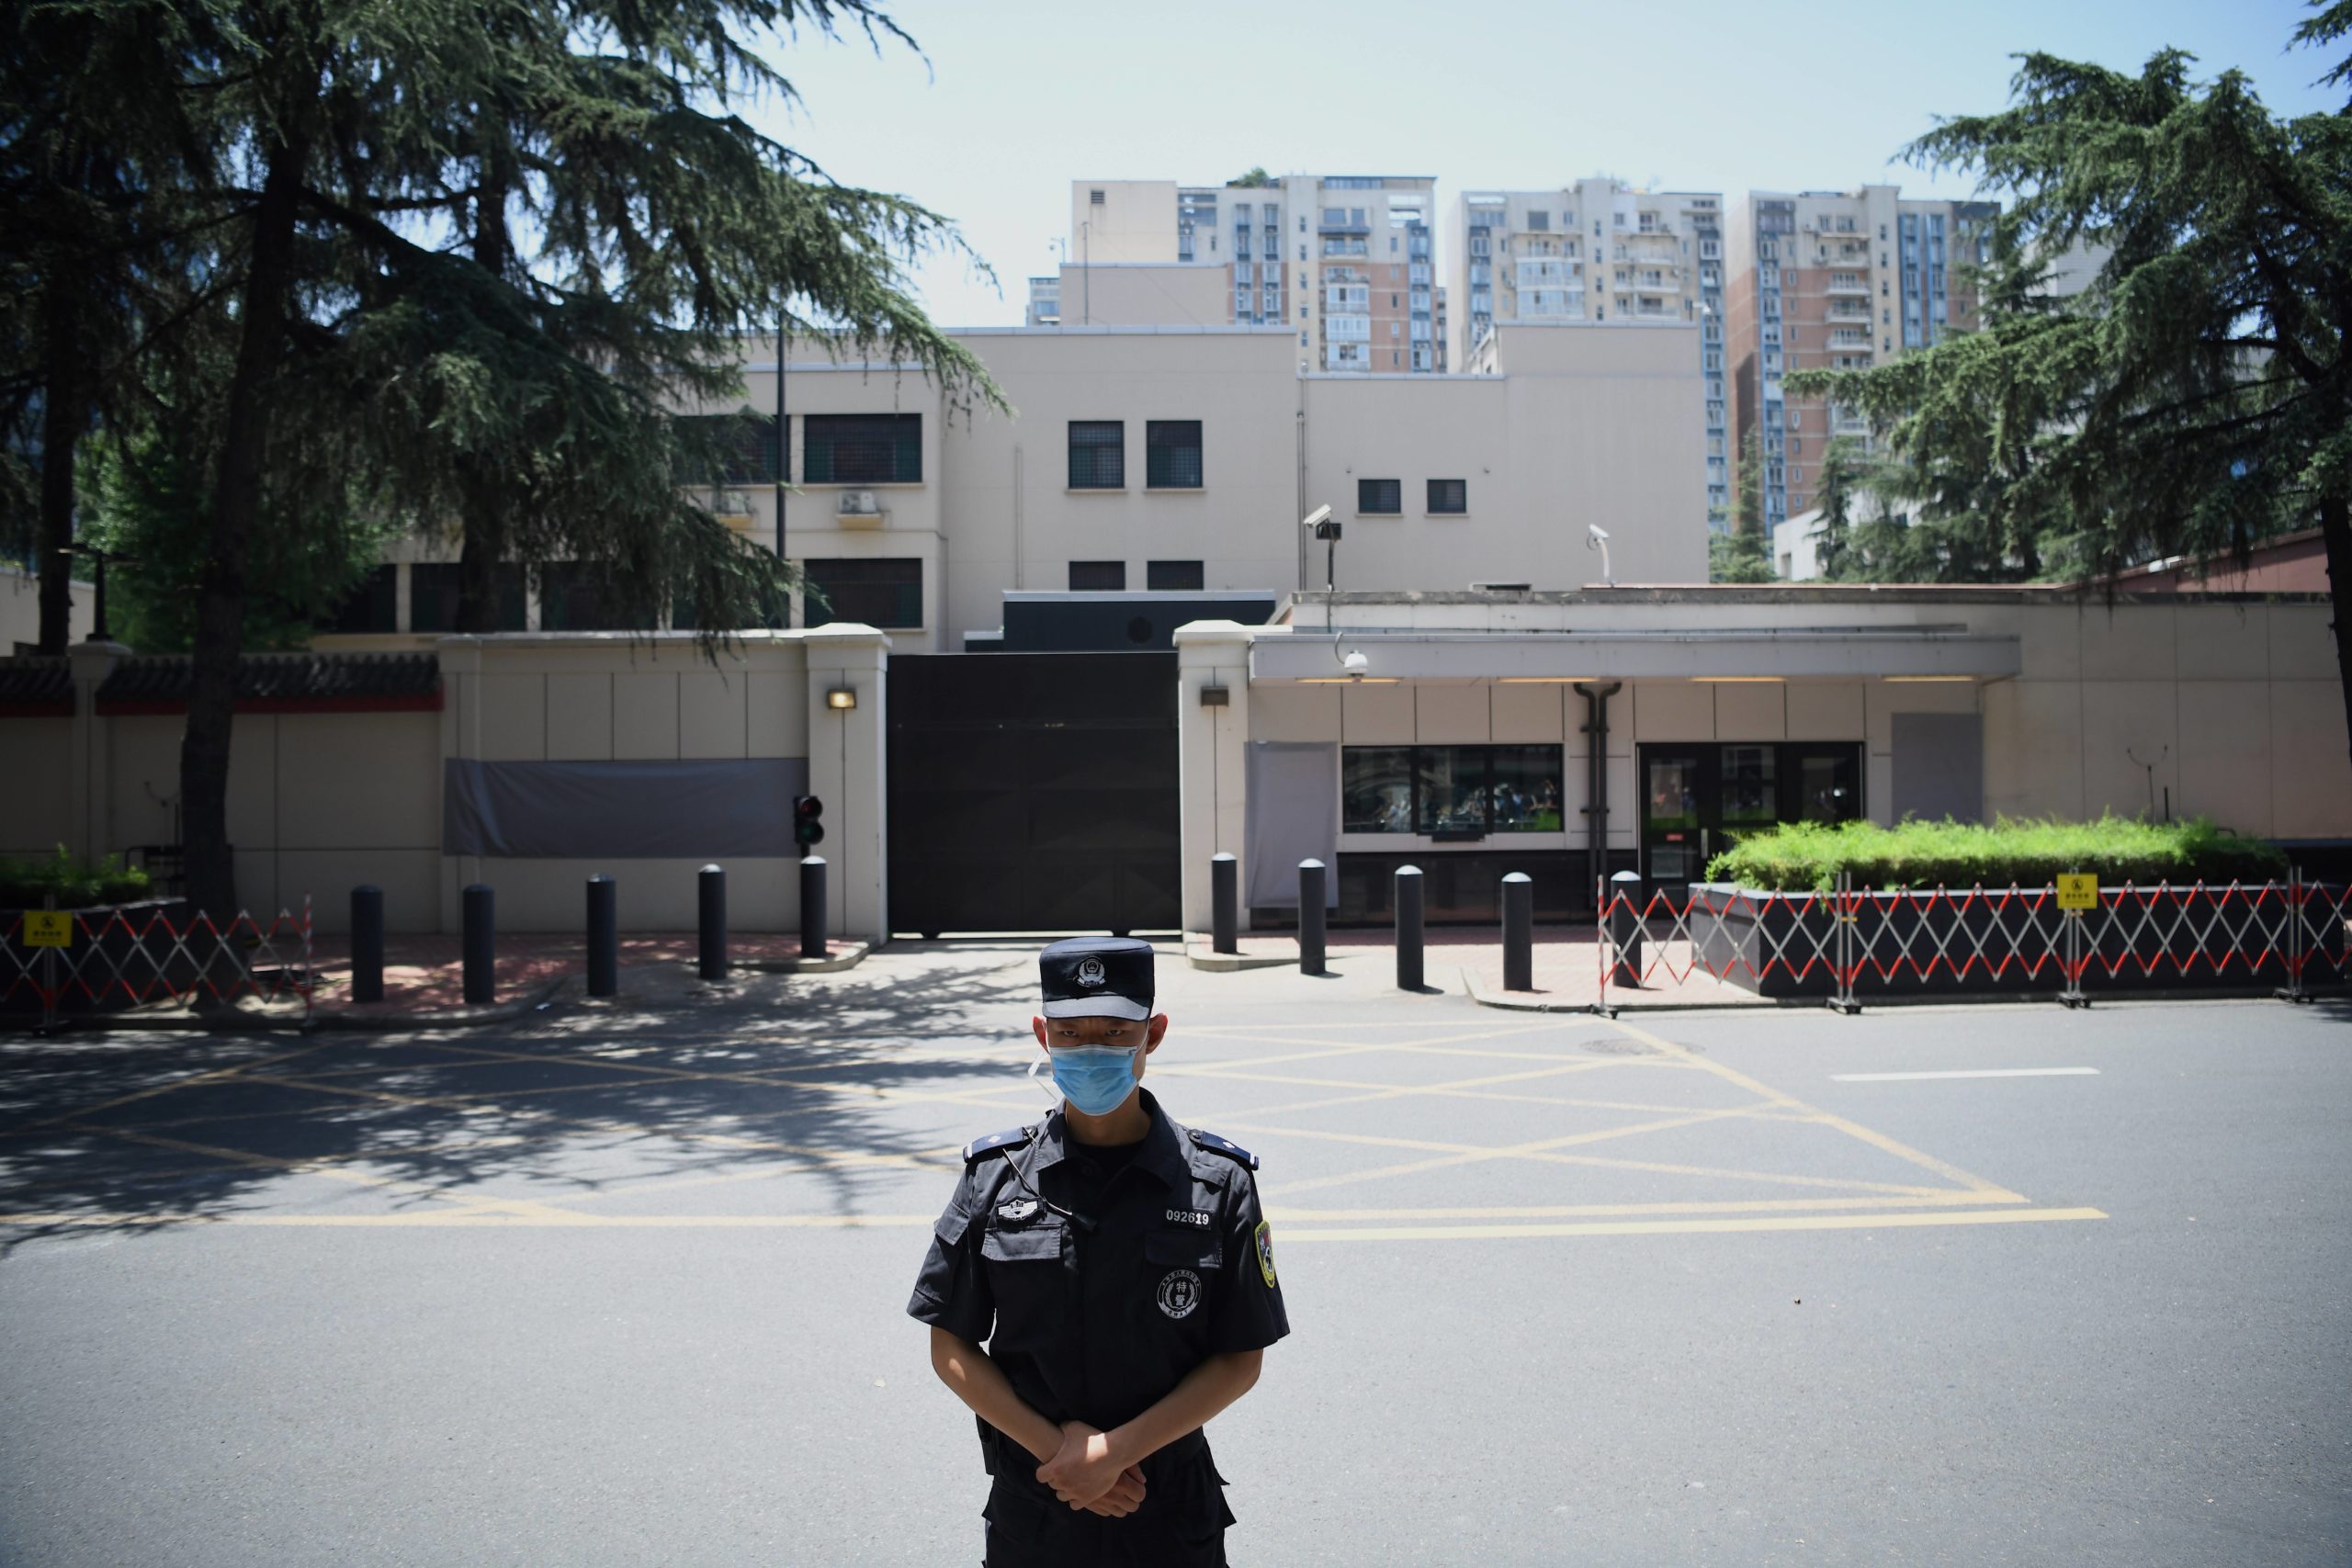 A policeman stands in front of the US Consulate in Chengdu, southwestern China's Sichuan province, on July 27, 2020. - Chinese authorities took over the United States consulate in Chengdu, the foreign ministry said, days after Beijing ordered it to close in retaliation for the shuttering of its mission in Houston. (Photo by Noel Celis / AFP) (Photo by NOEL CELIS/AFP via Getty Images)